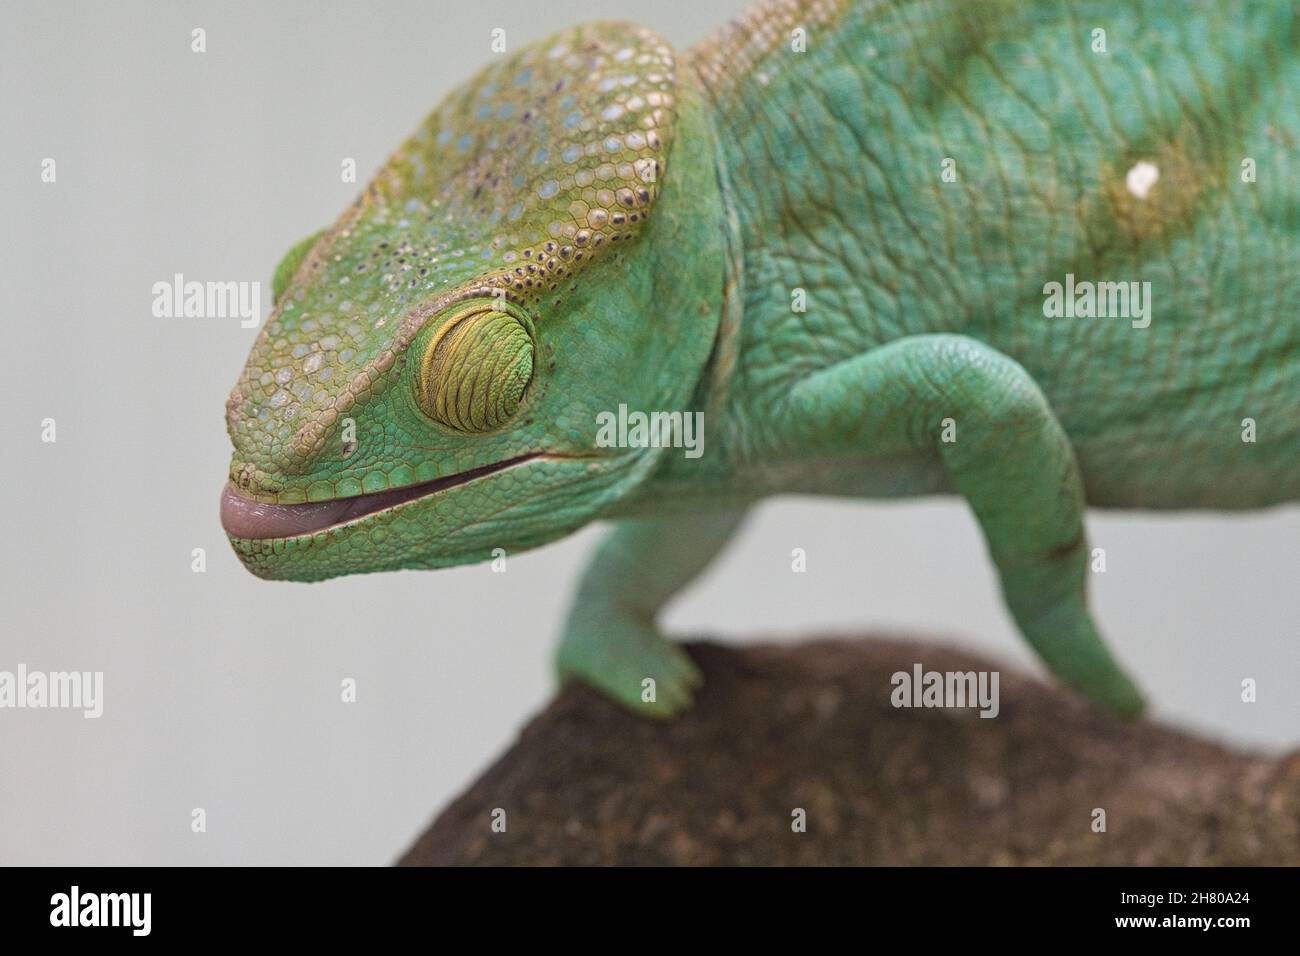 Chameleon on a branch with eye contact with the viewer. green, yellow red scales. Detailed close-up of the interesting reptile. Stock Photo